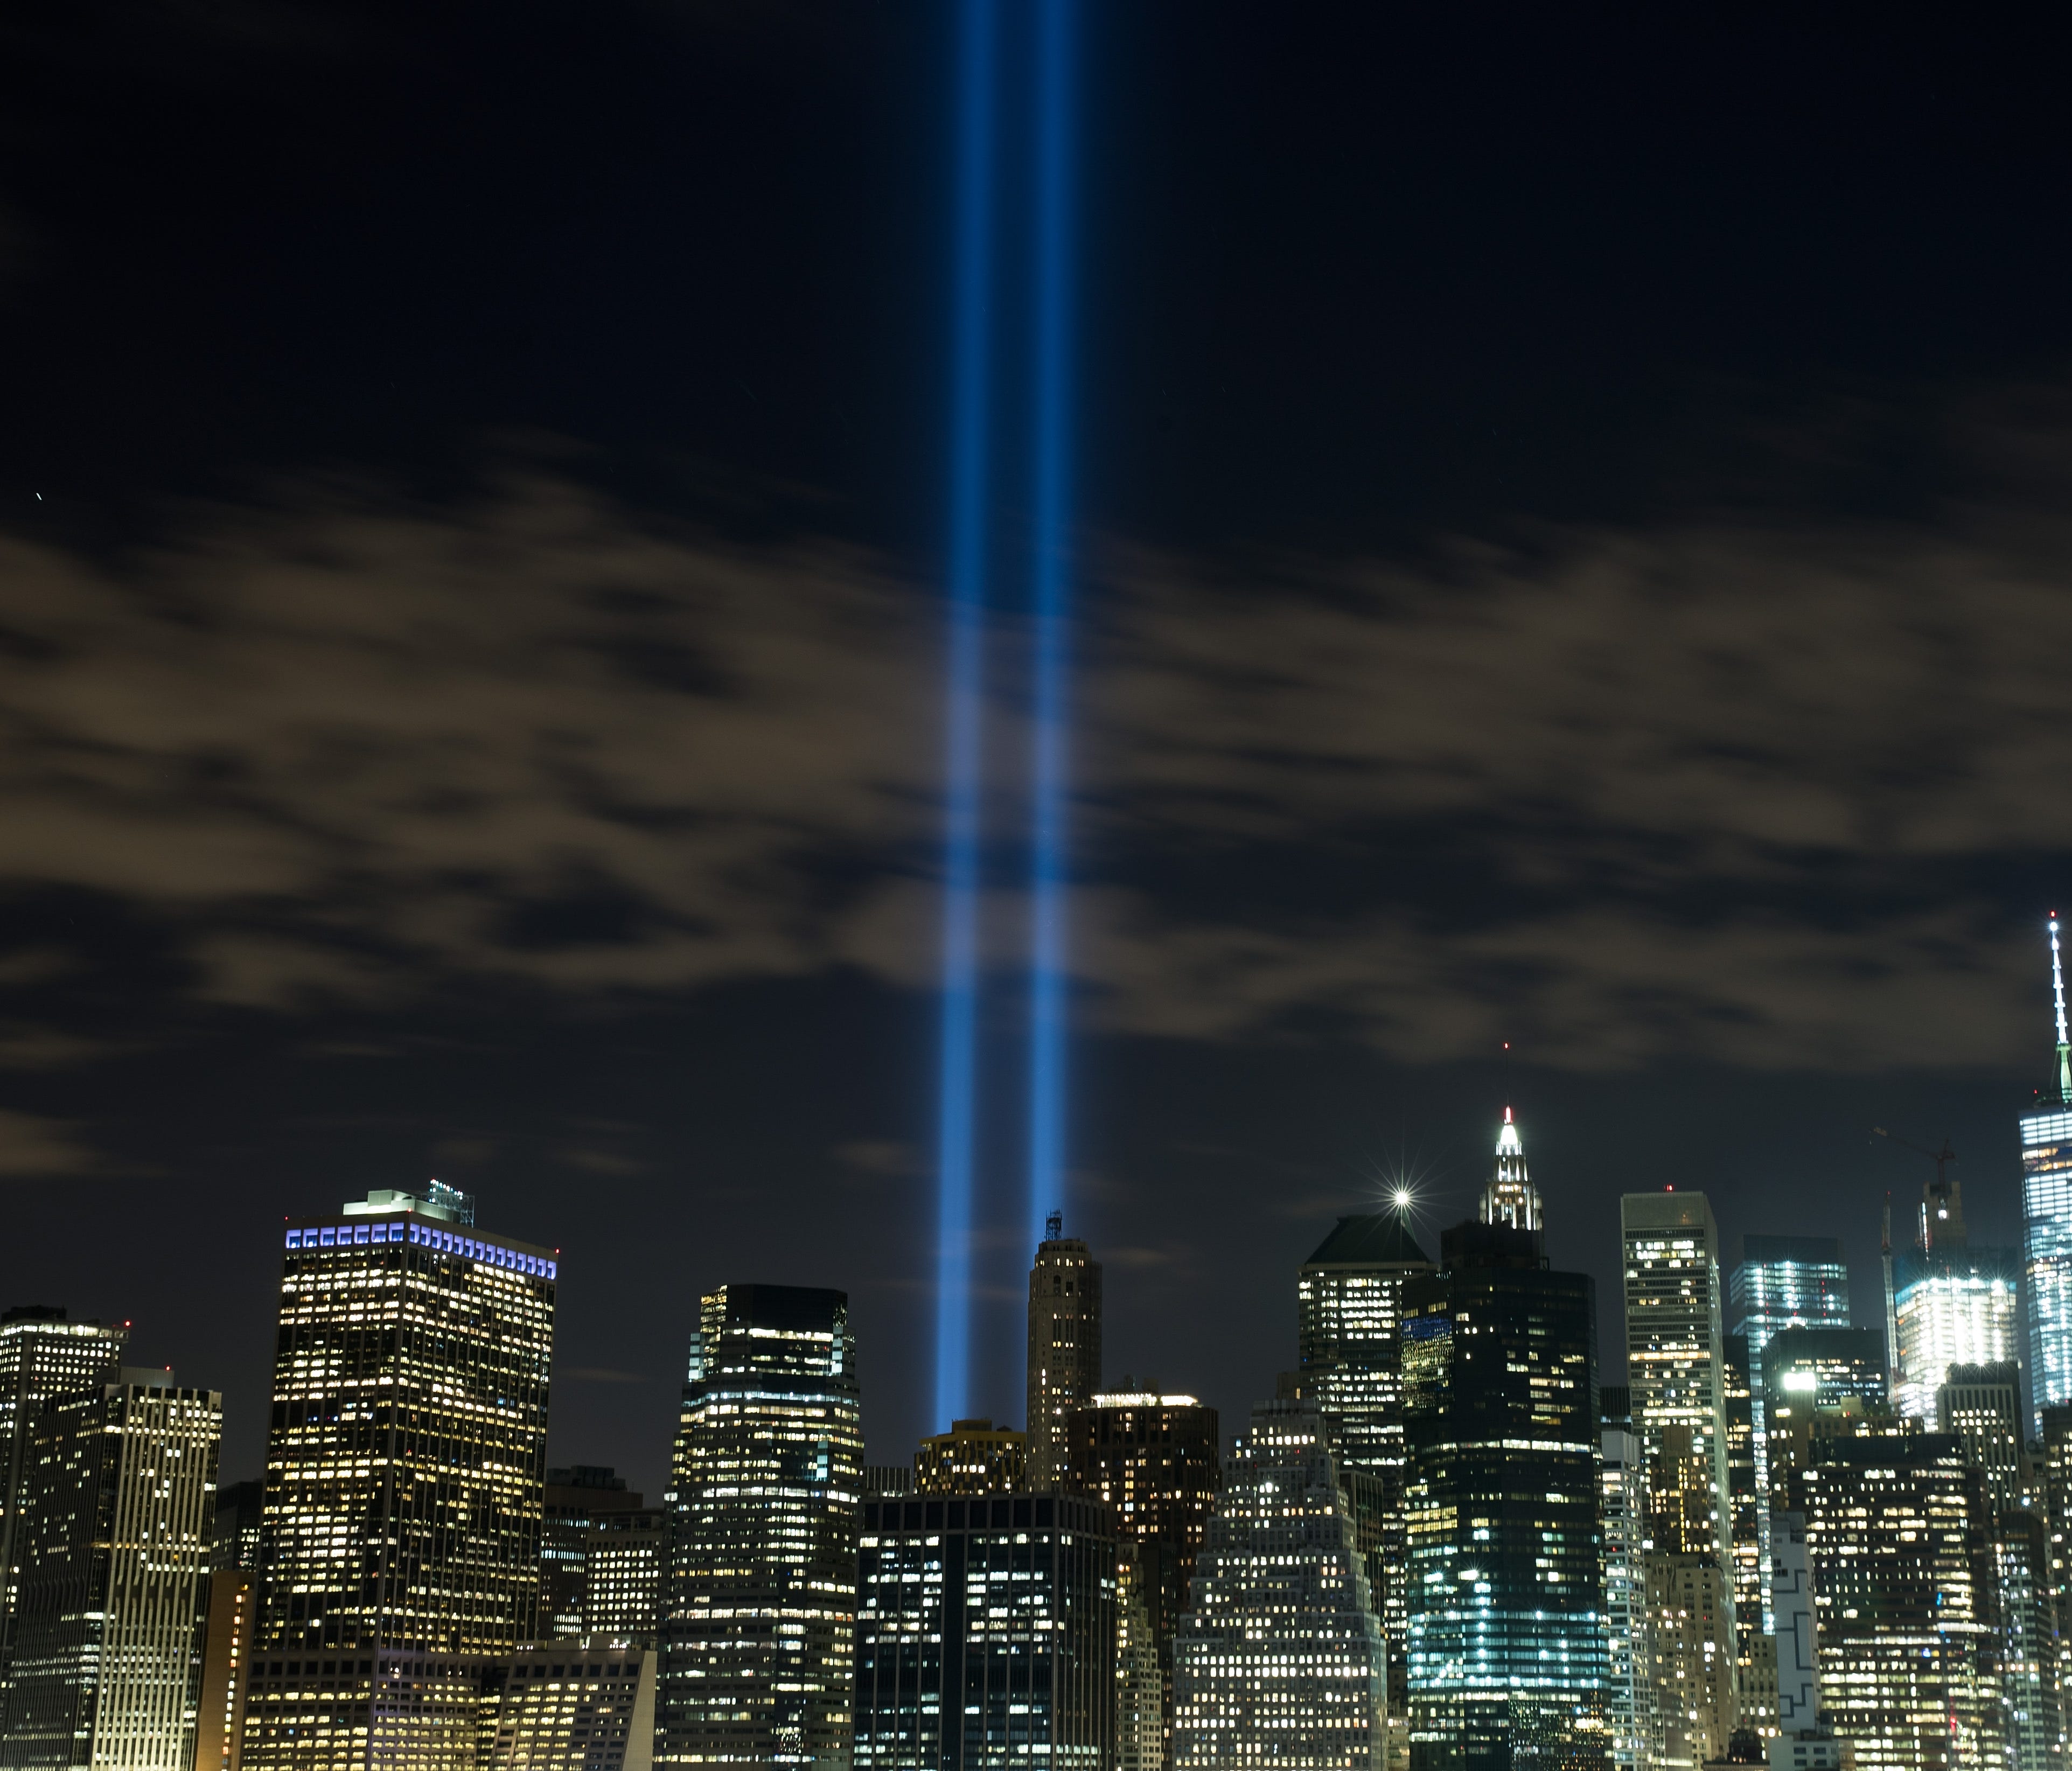 The 'Tribute in Light' rises from the Lower Manhattan skyline on Sept. 7, 2016.